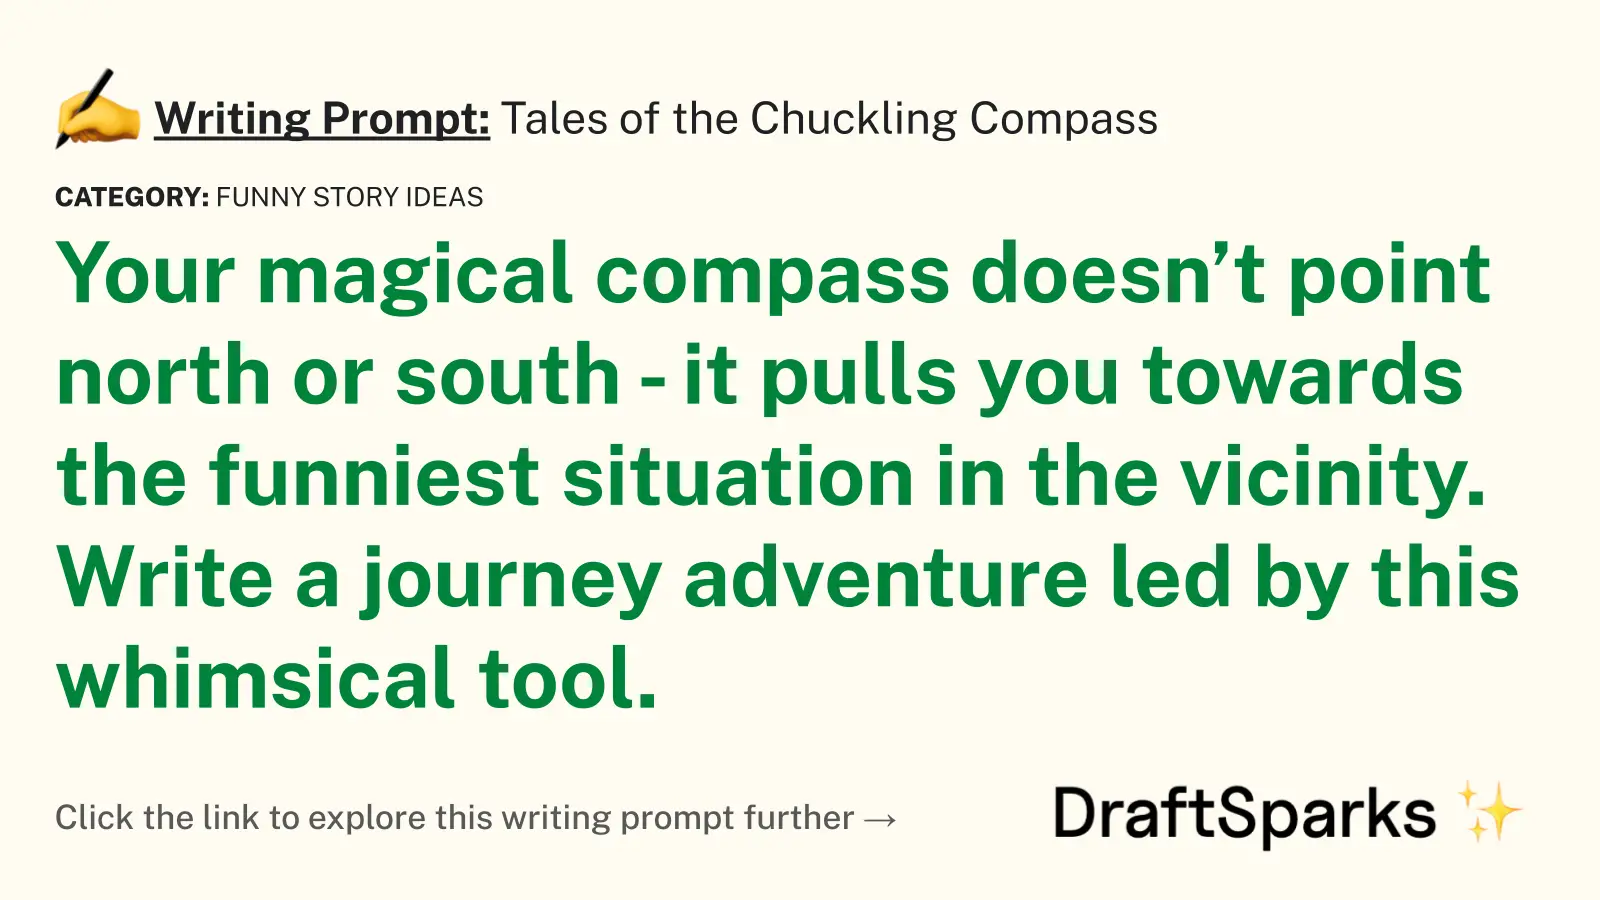 Tales of the Chuckling Compass